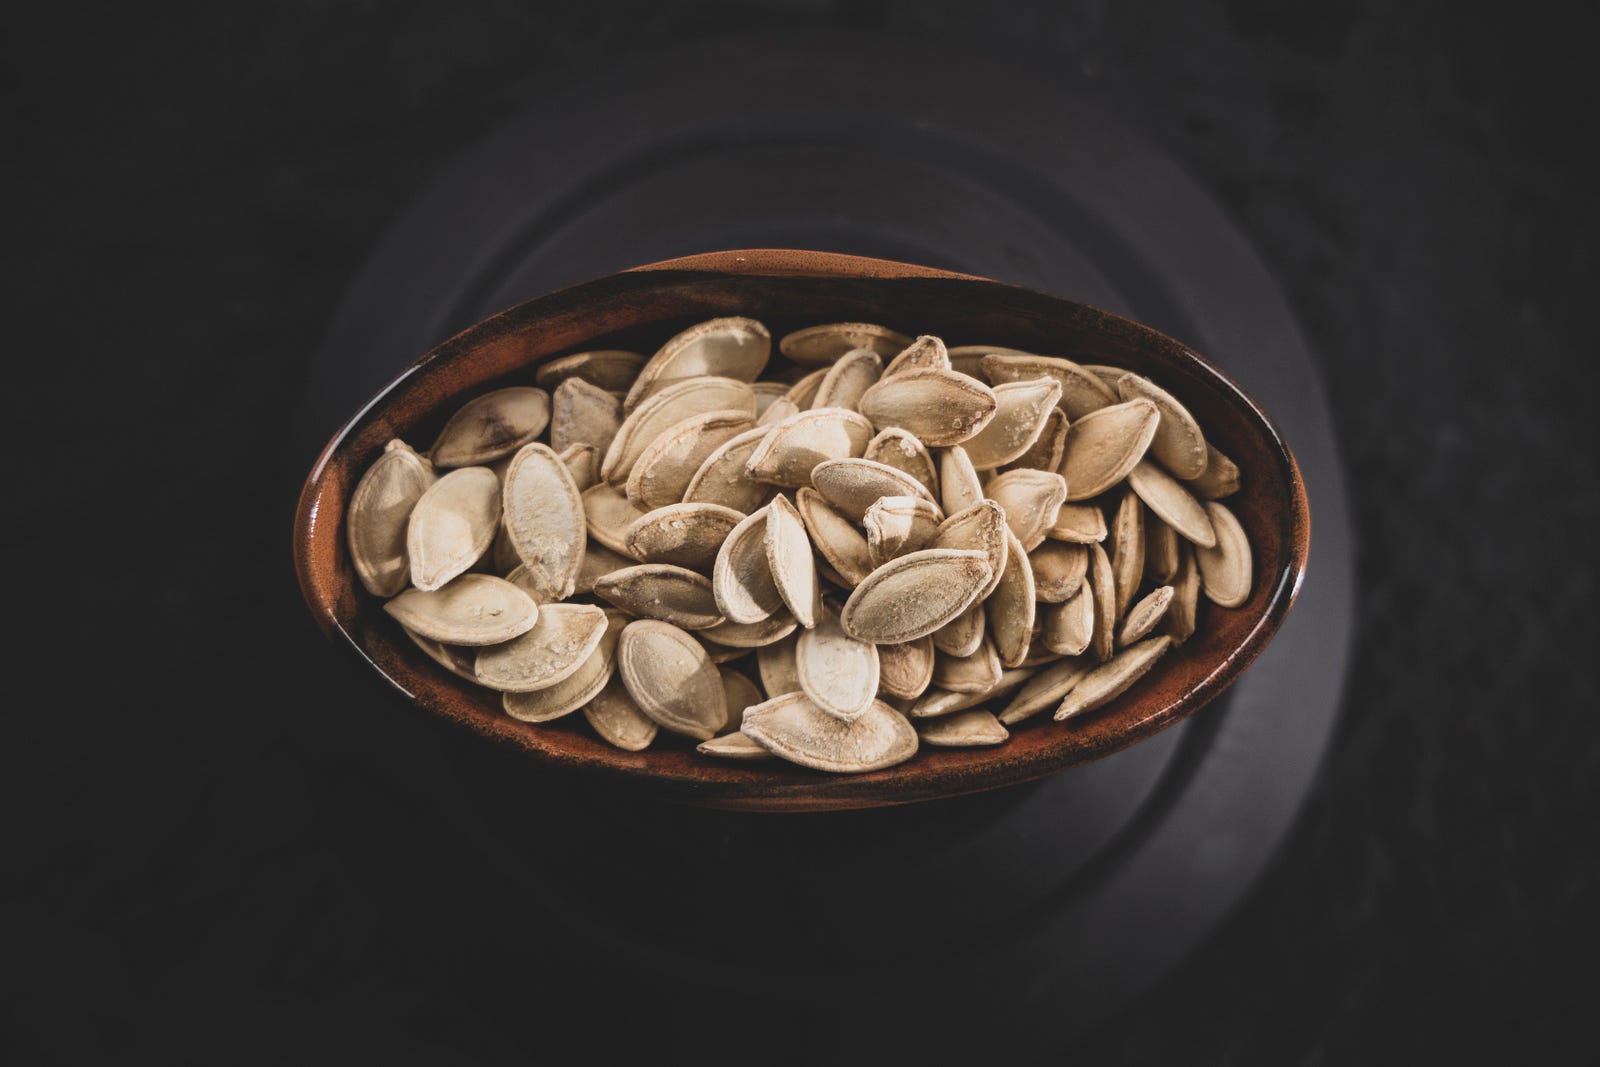 Pumpkin seeds fill a shallow wooden bowl (black background). Pumpkin seeds are rich in magnesium.